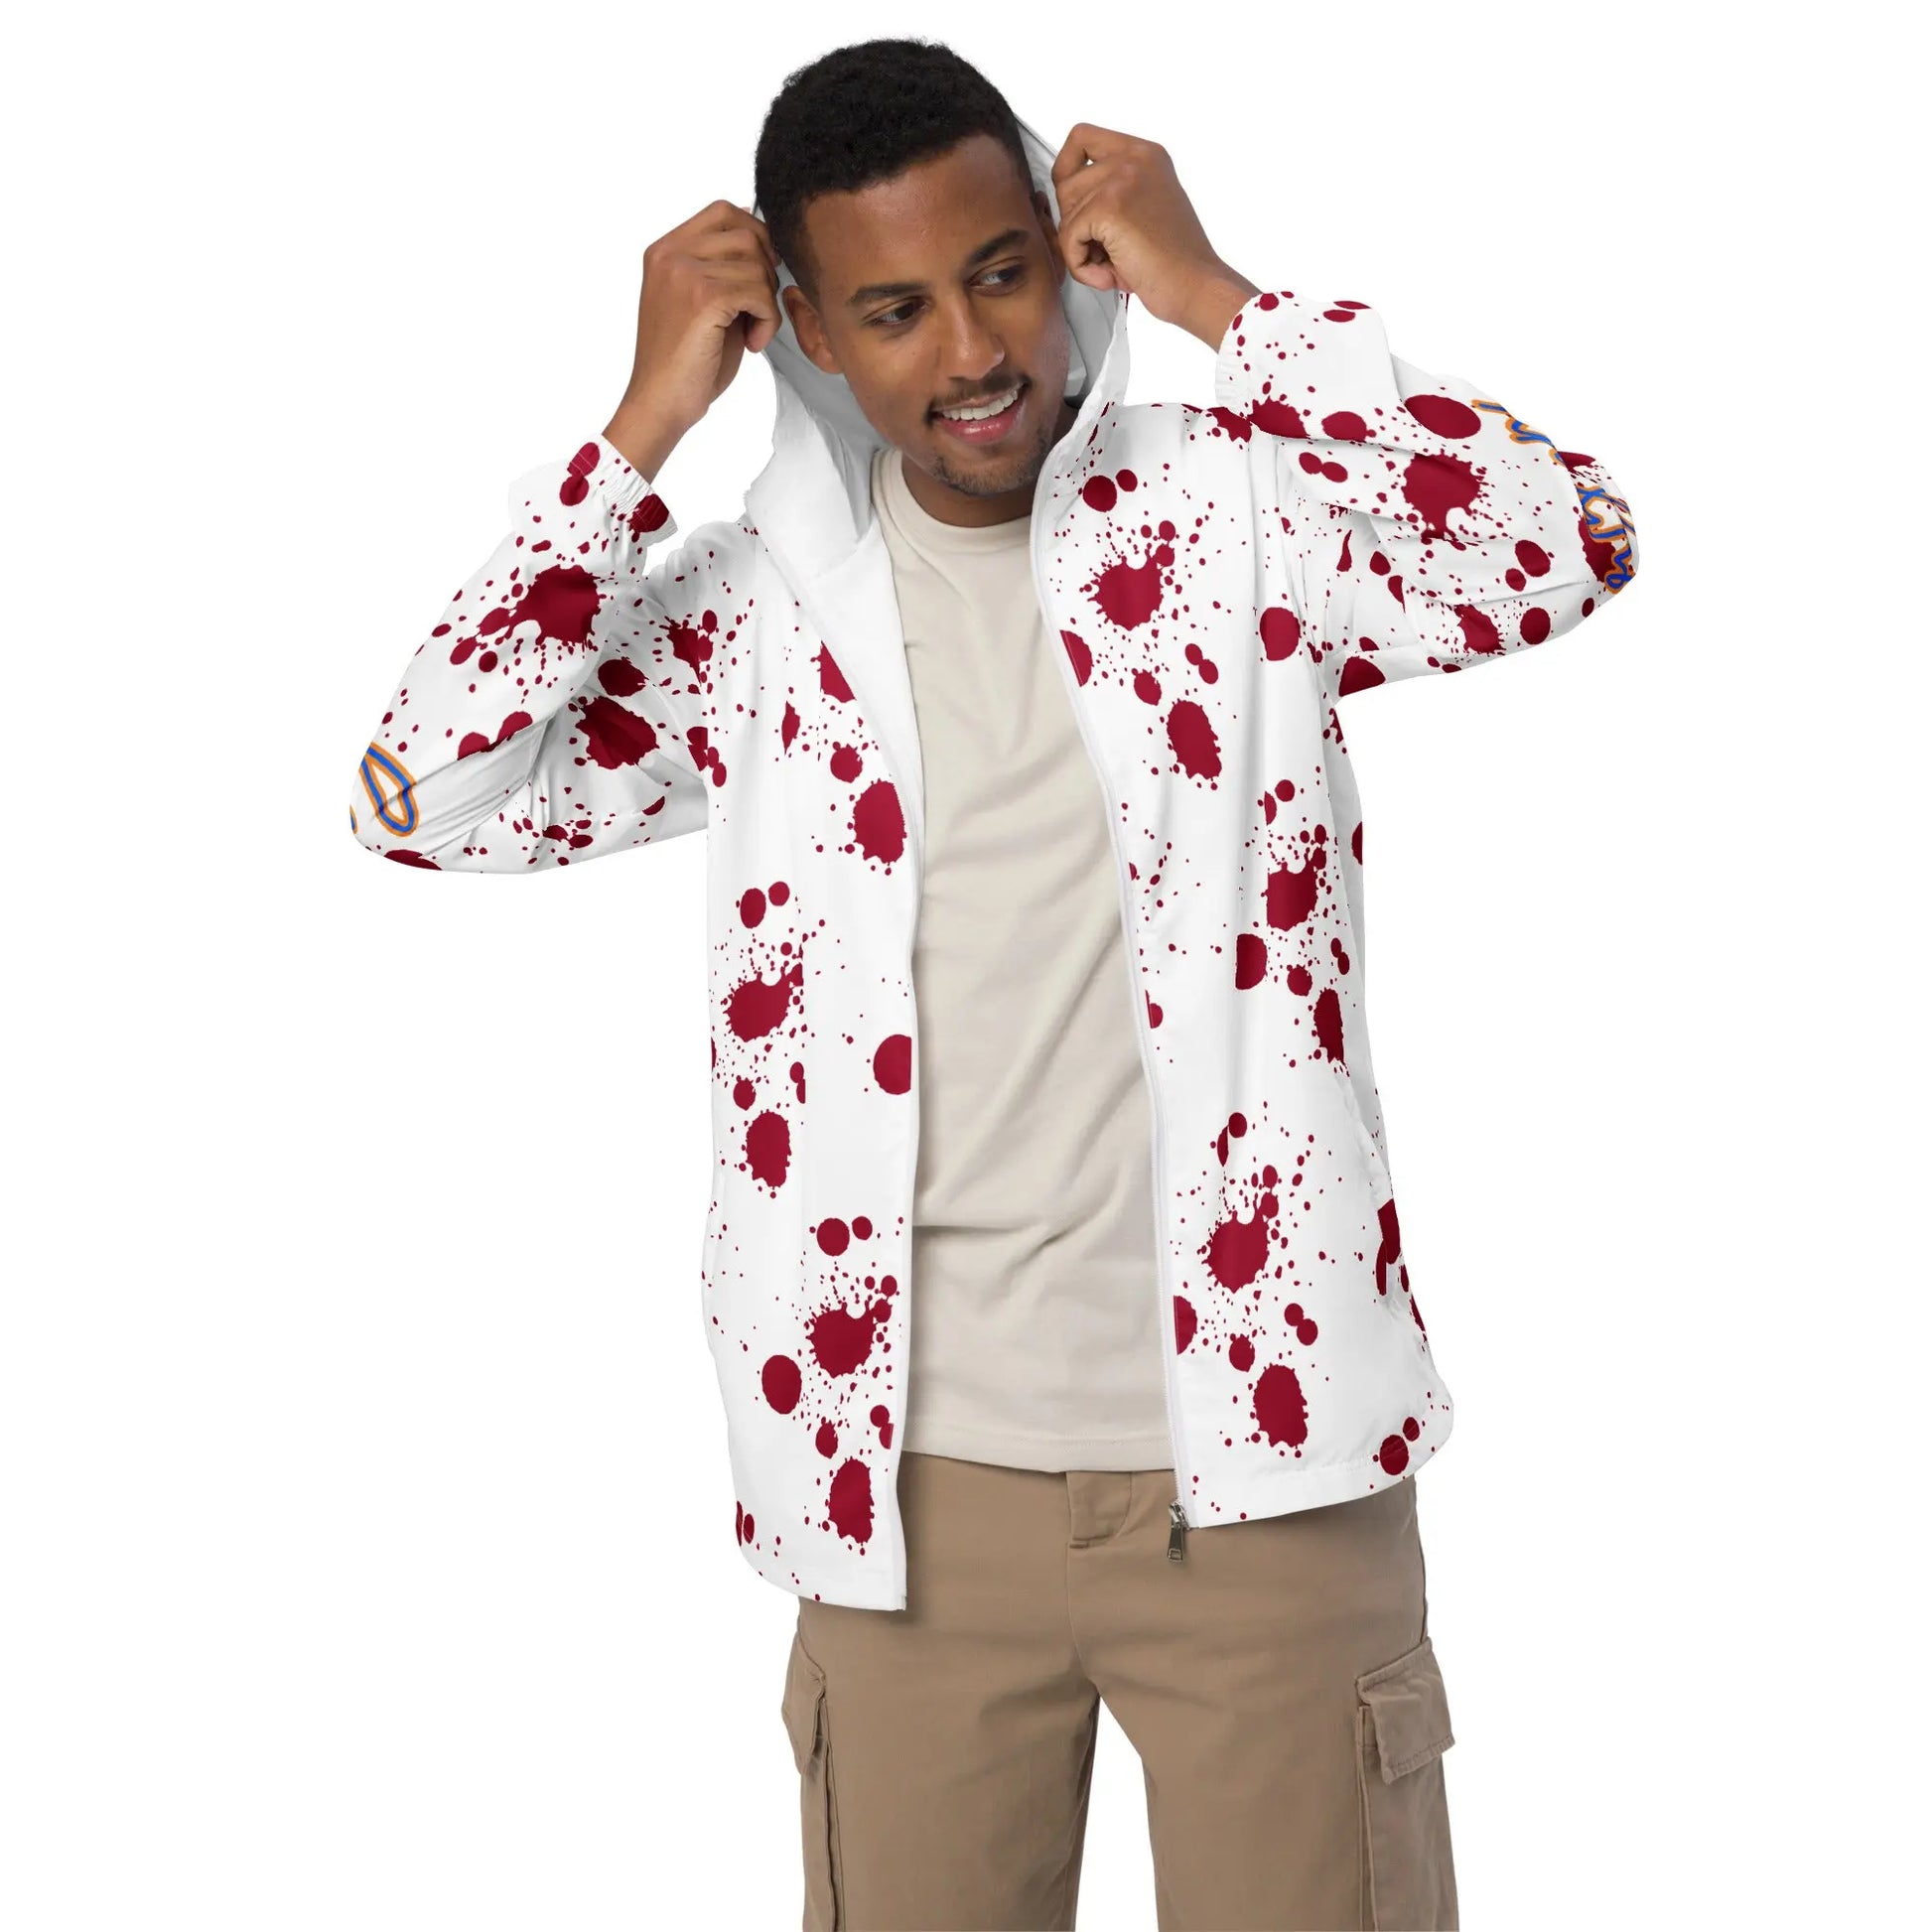 Wamarzon's Ghosted Men’s windbreaker - Image #8